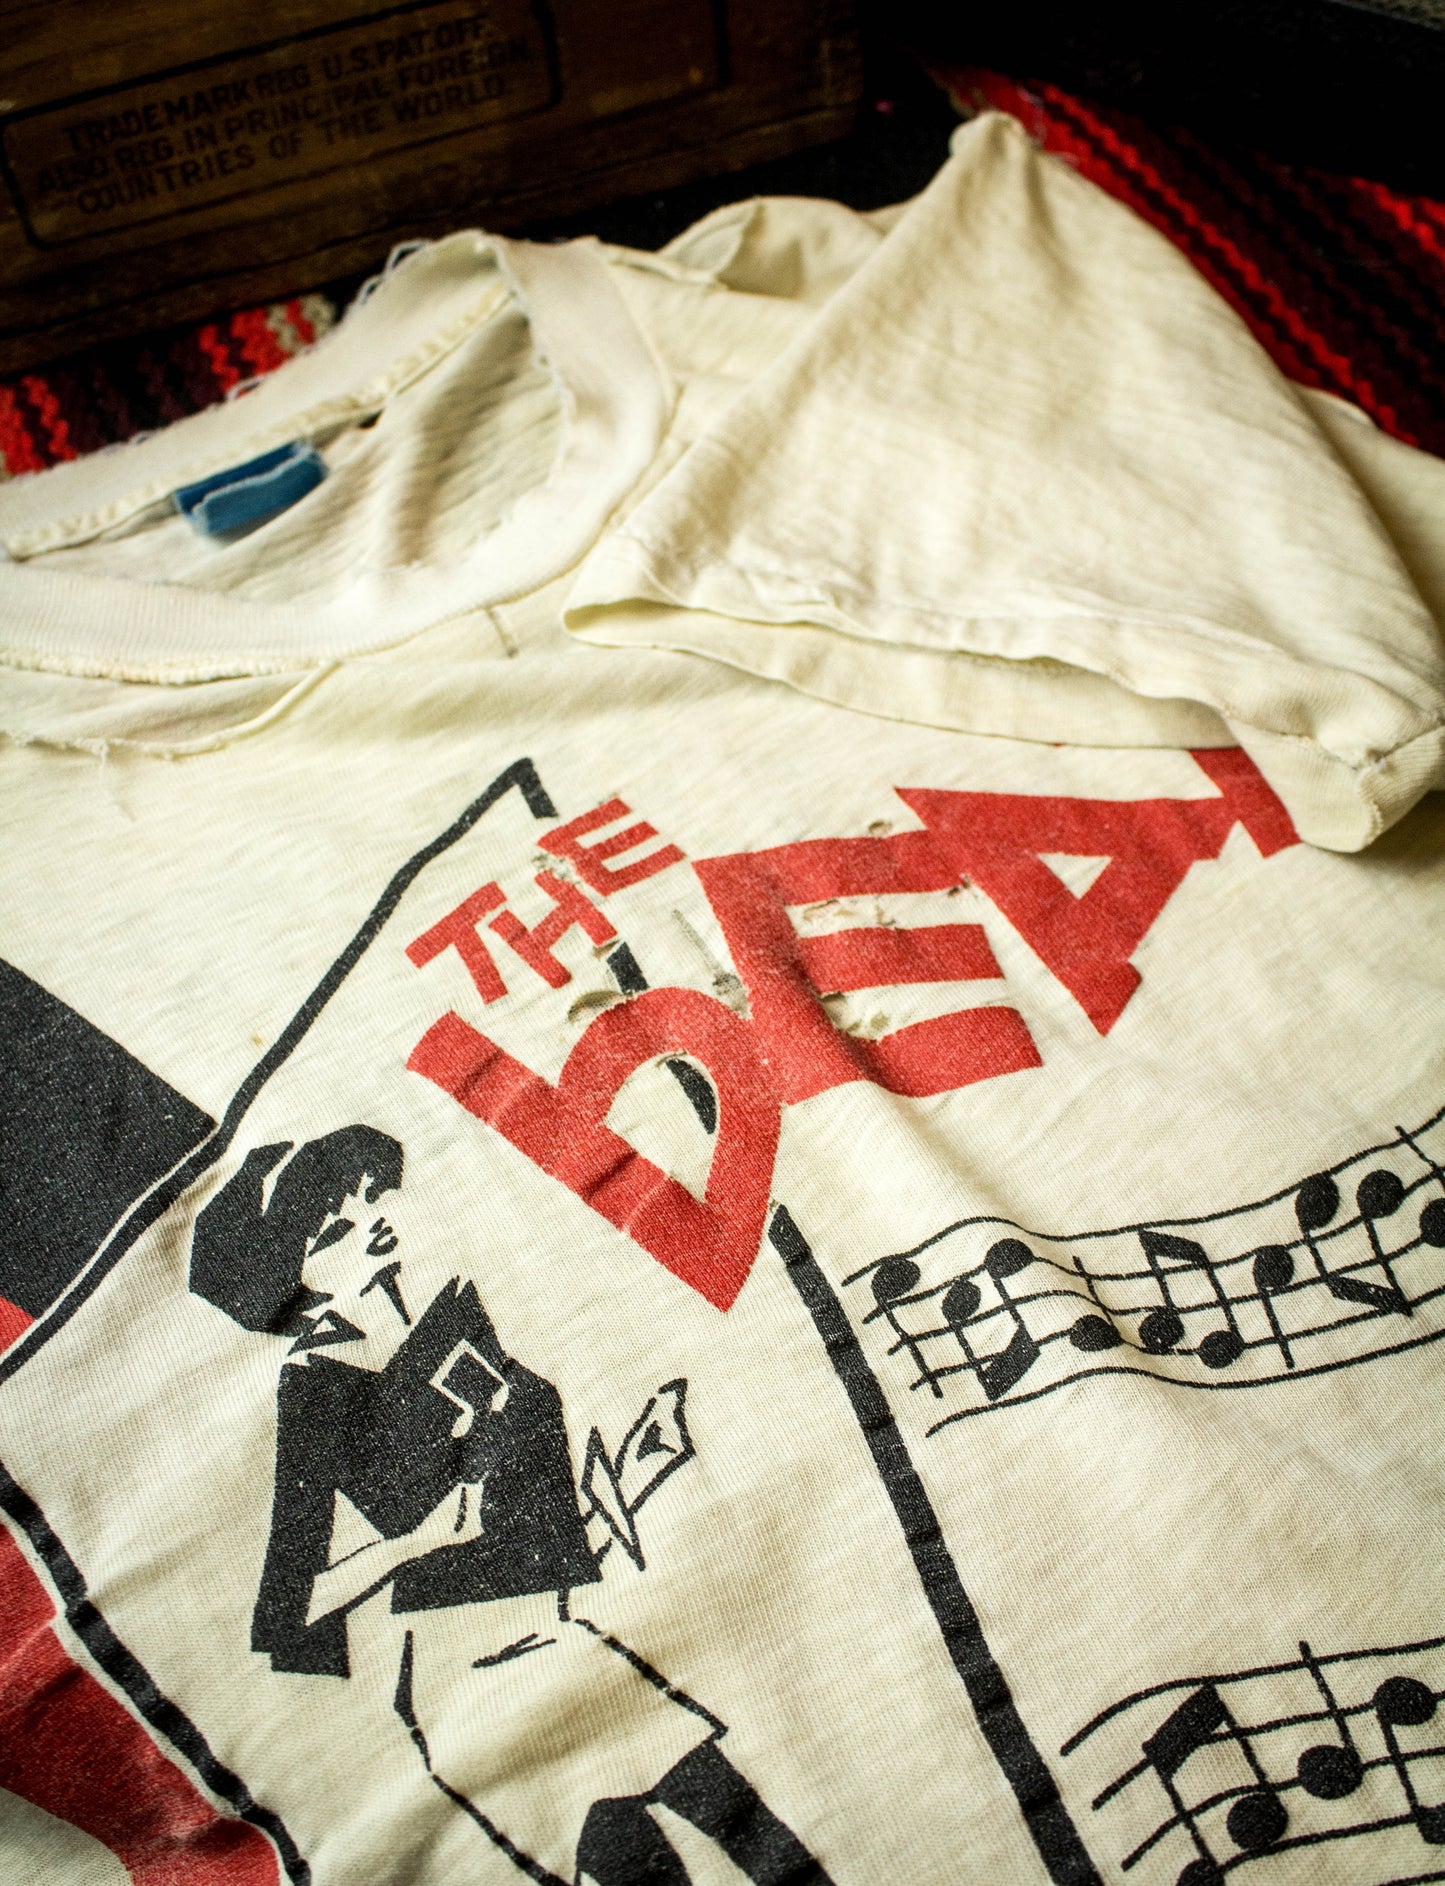 Vintage 80s The English Beat The Beat Go Feet Trashed White Concert T Shirt Medium